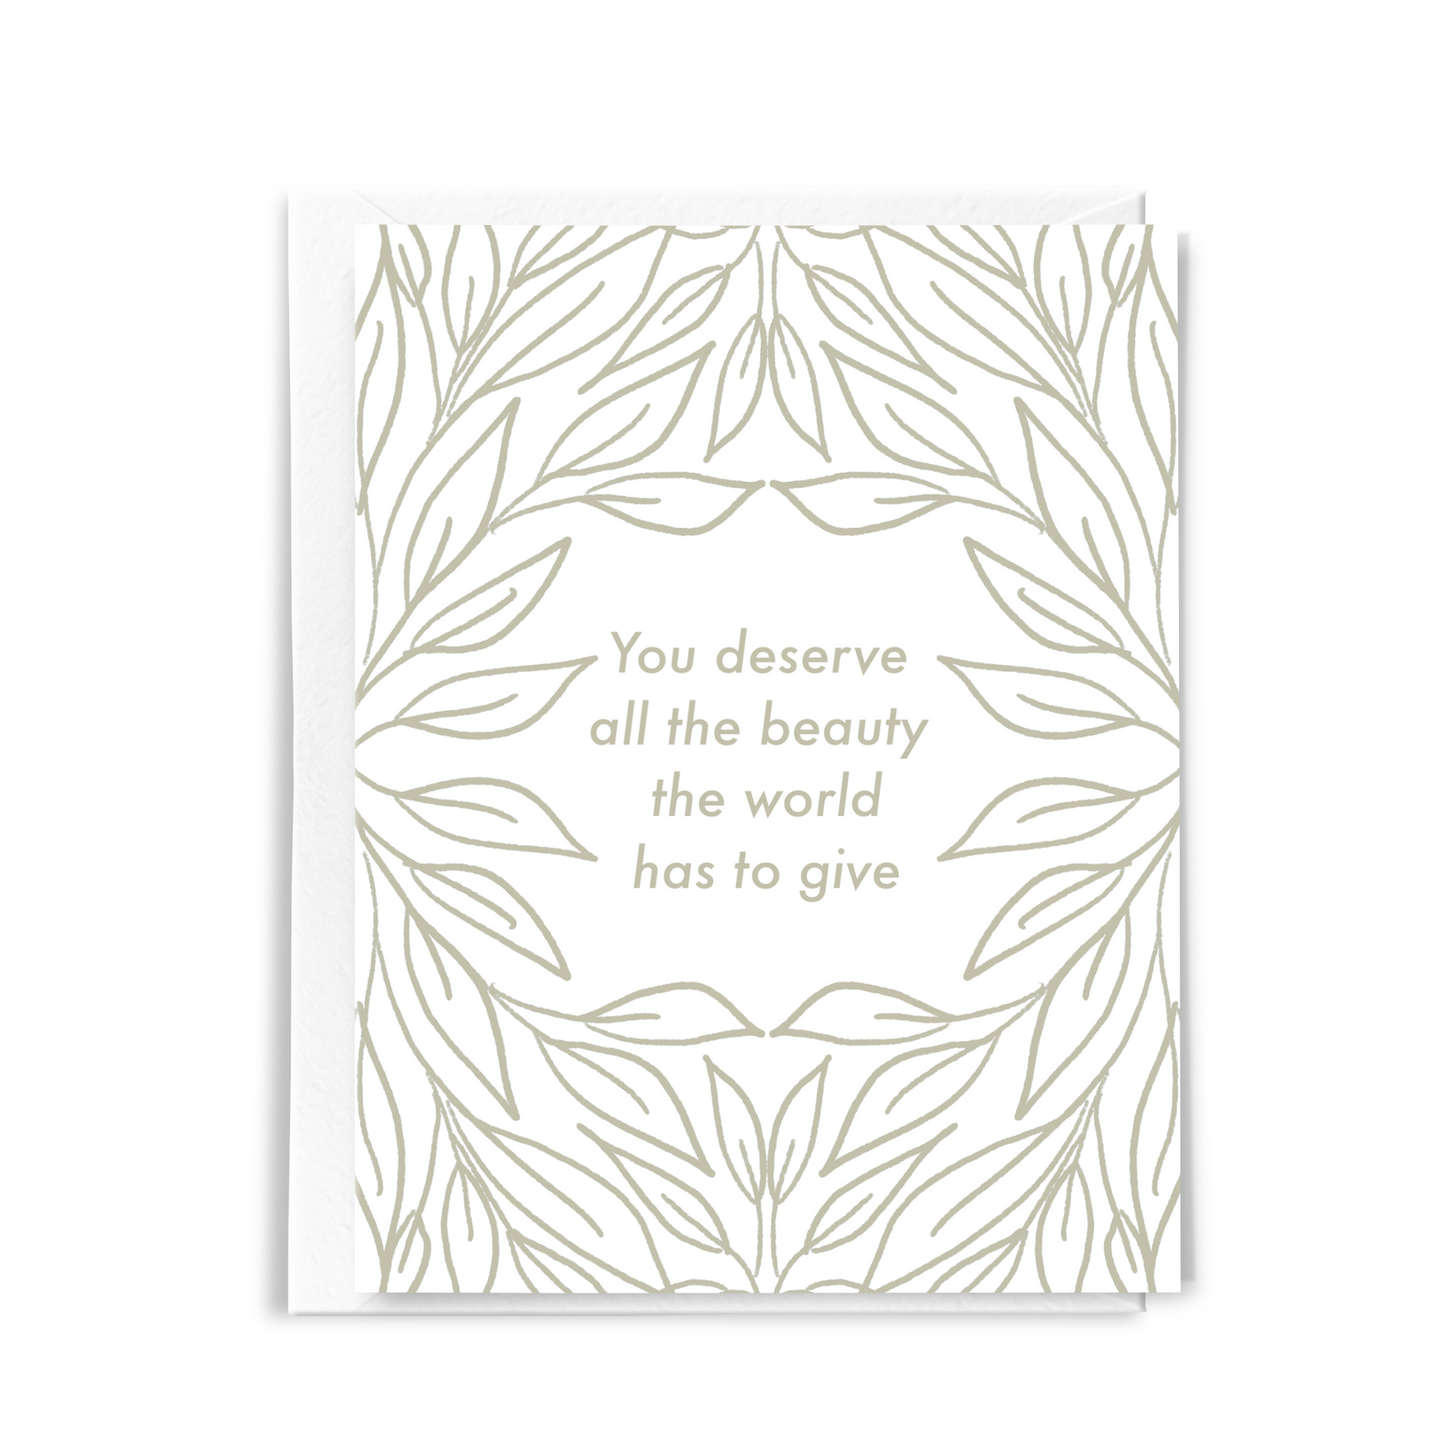 sweet and thoughtful friendship card with flower border